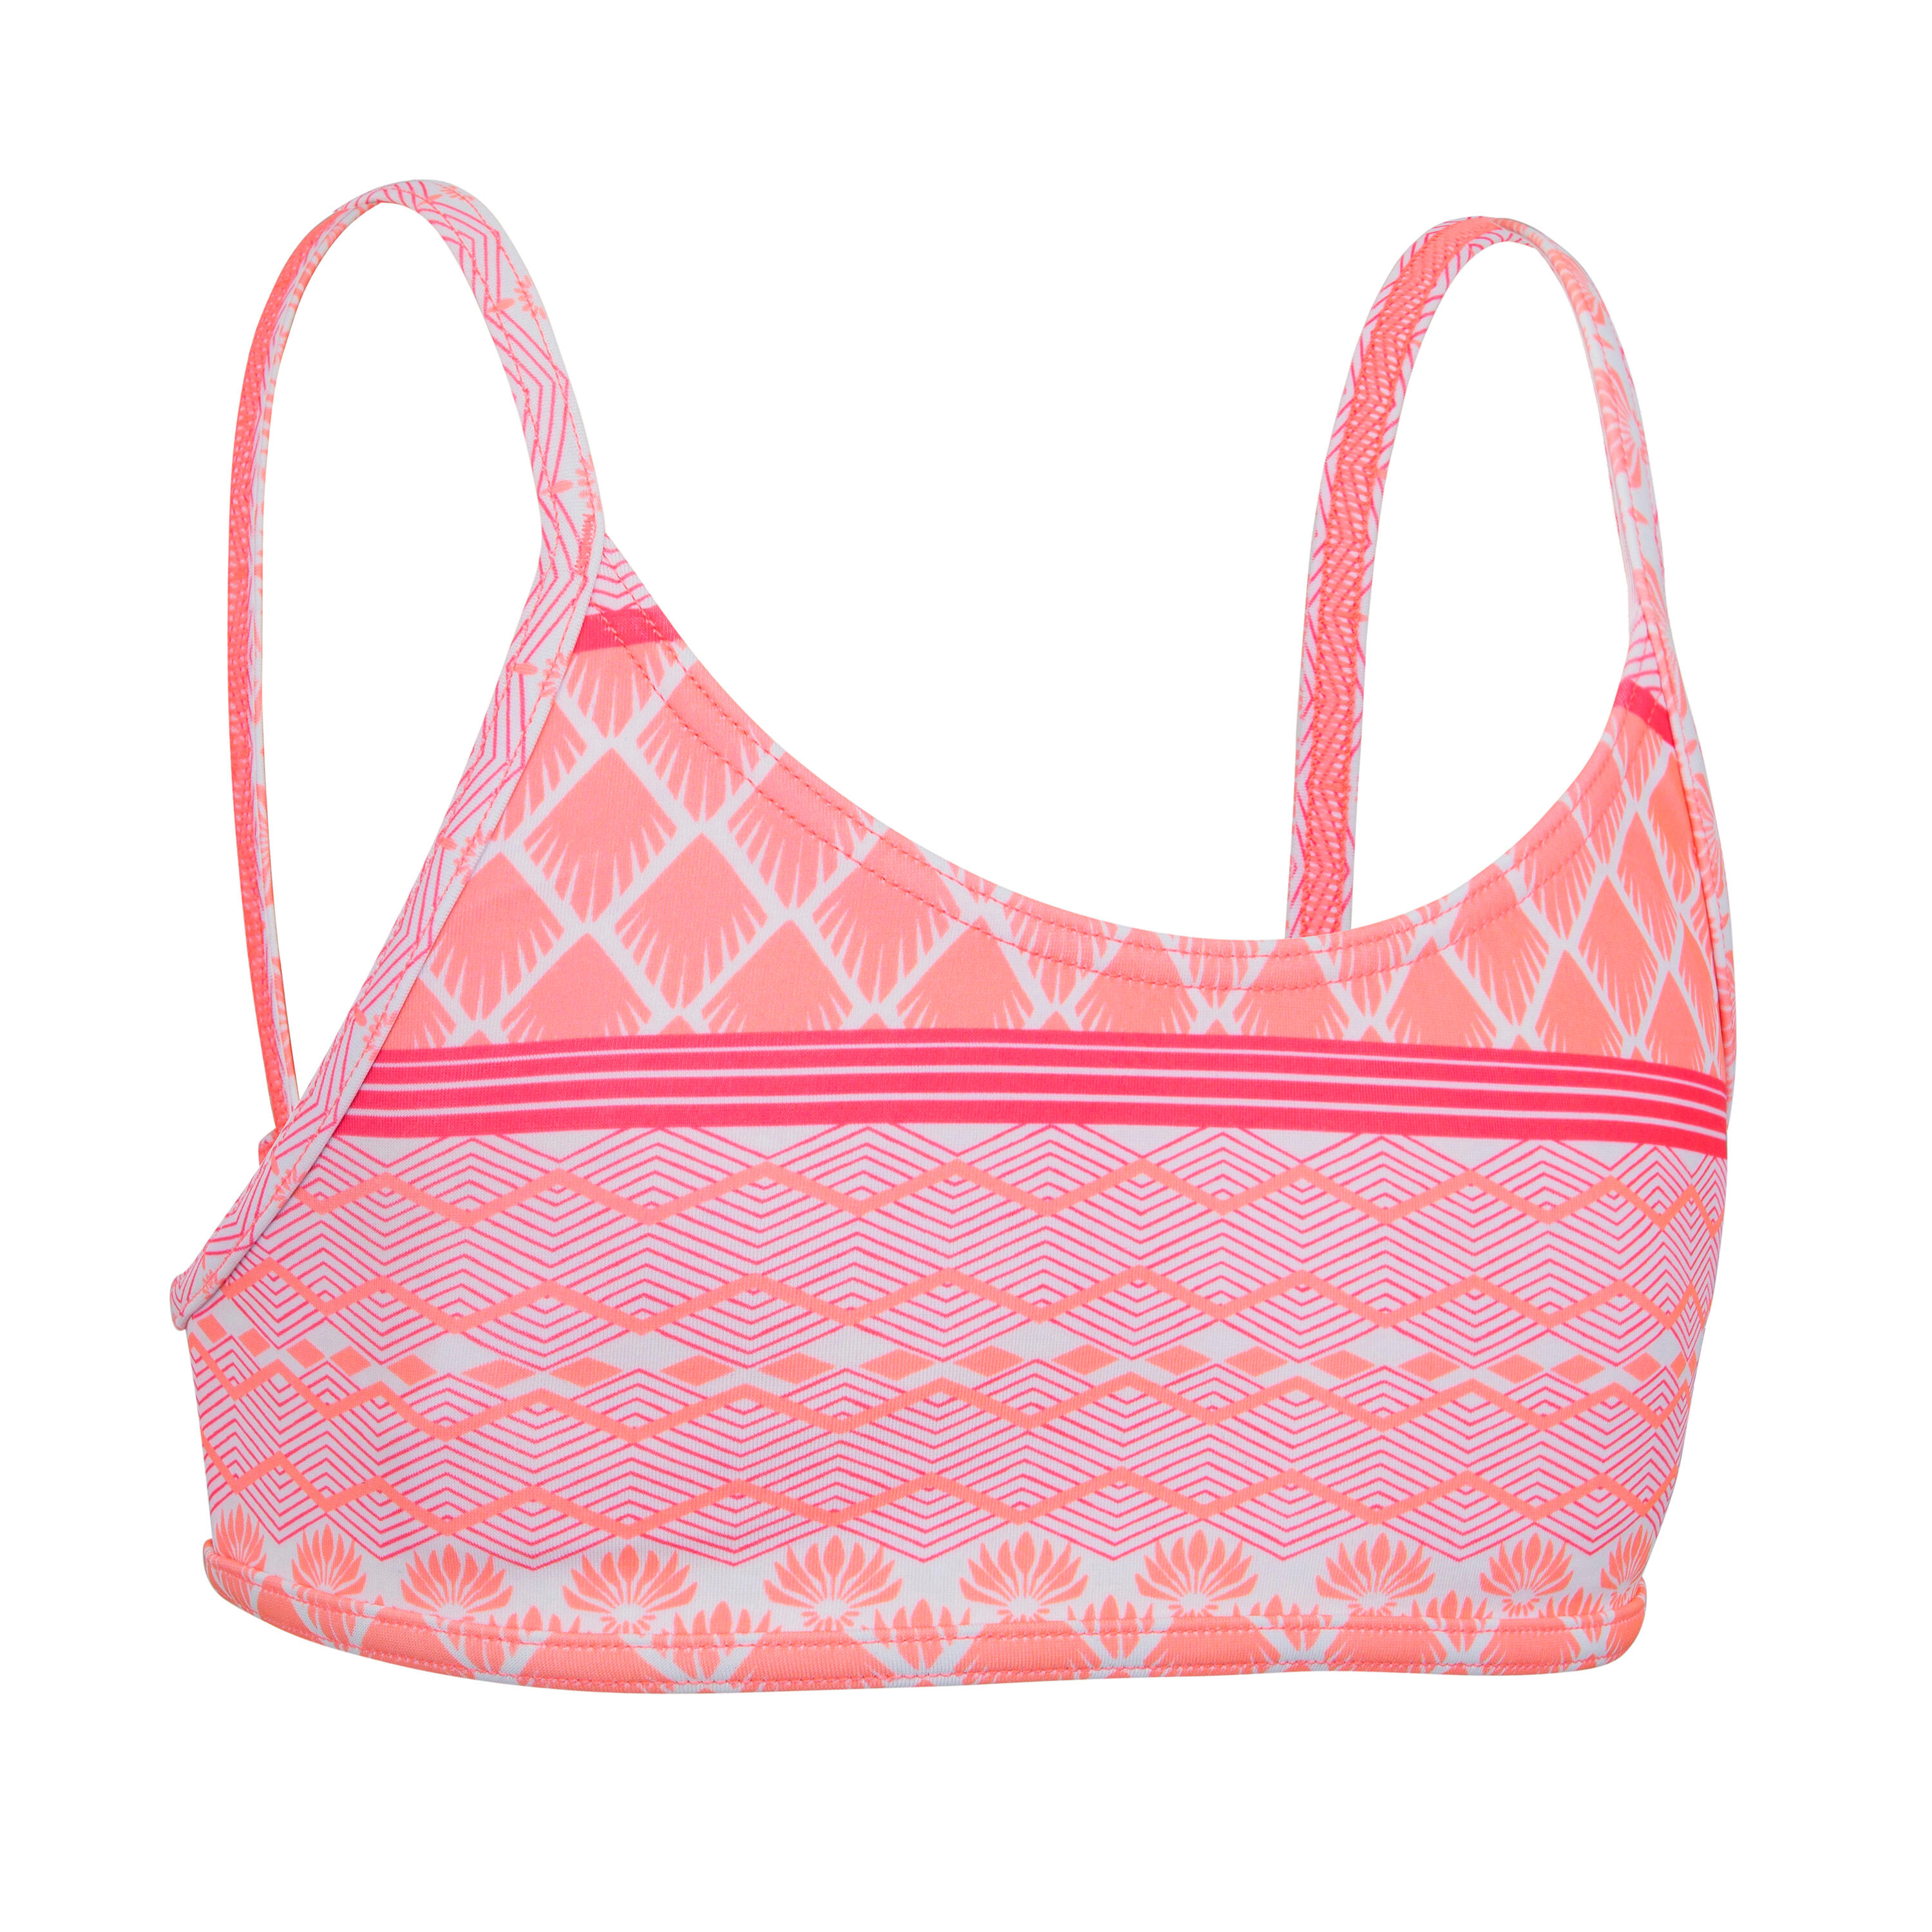 OLAIAN Girl's bra swimsuit top 100 coral